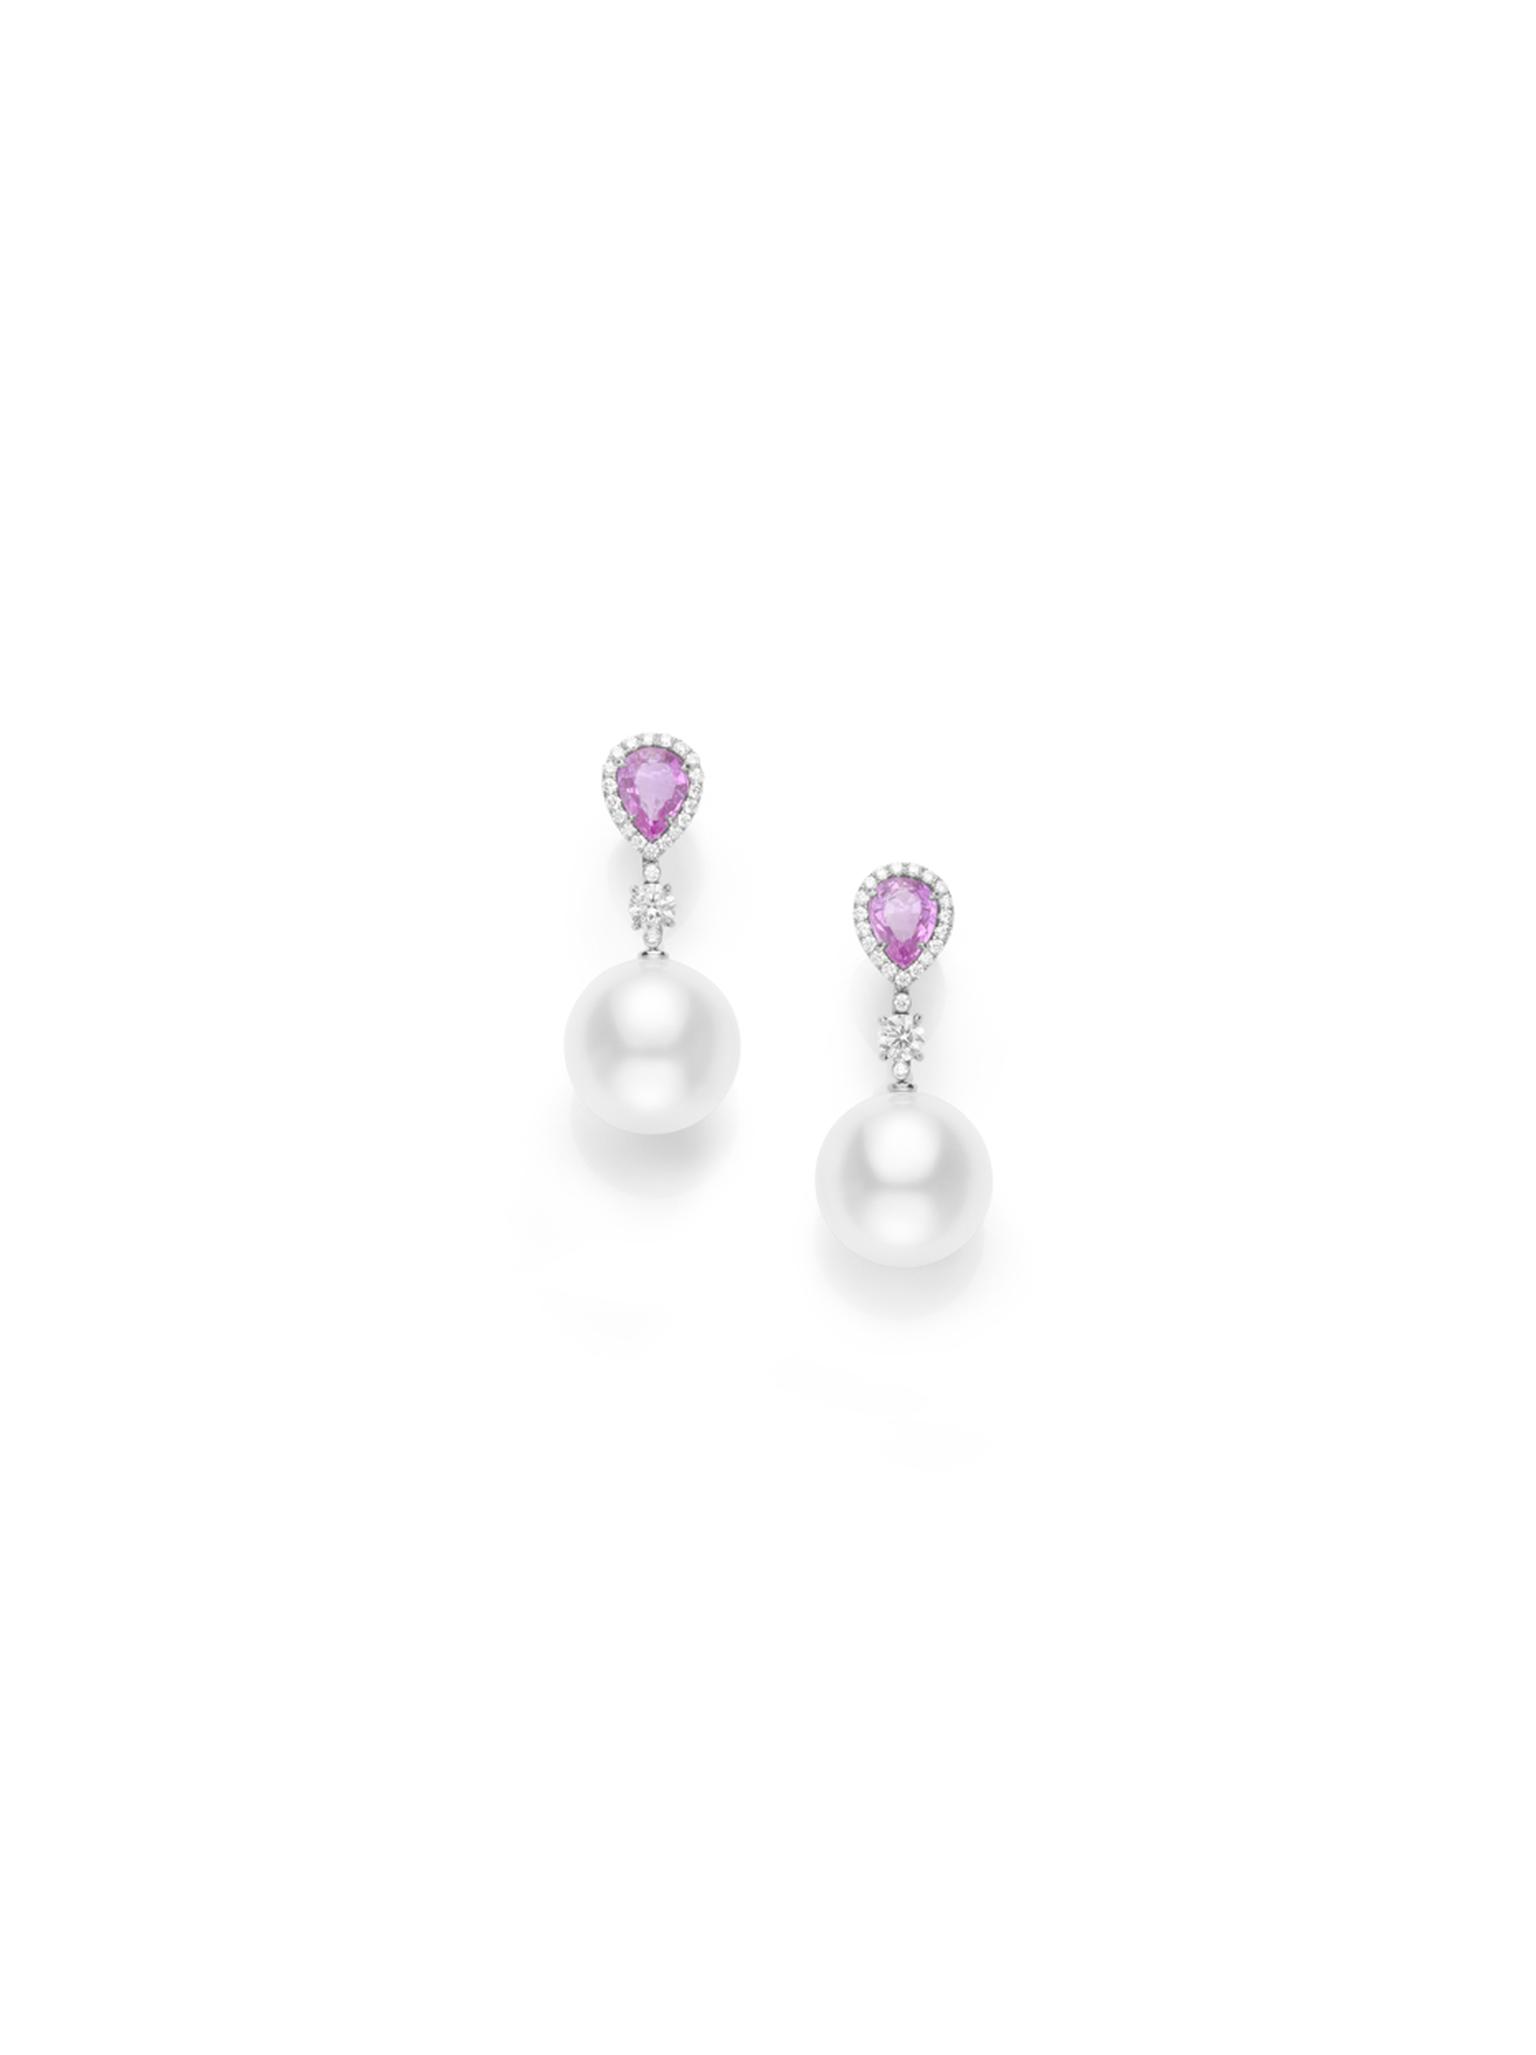 Mikimoto Color Prestige collection earrings featuring a pair of pink sapphires and pearls connected by a trail of brilliant-cut diamonds.